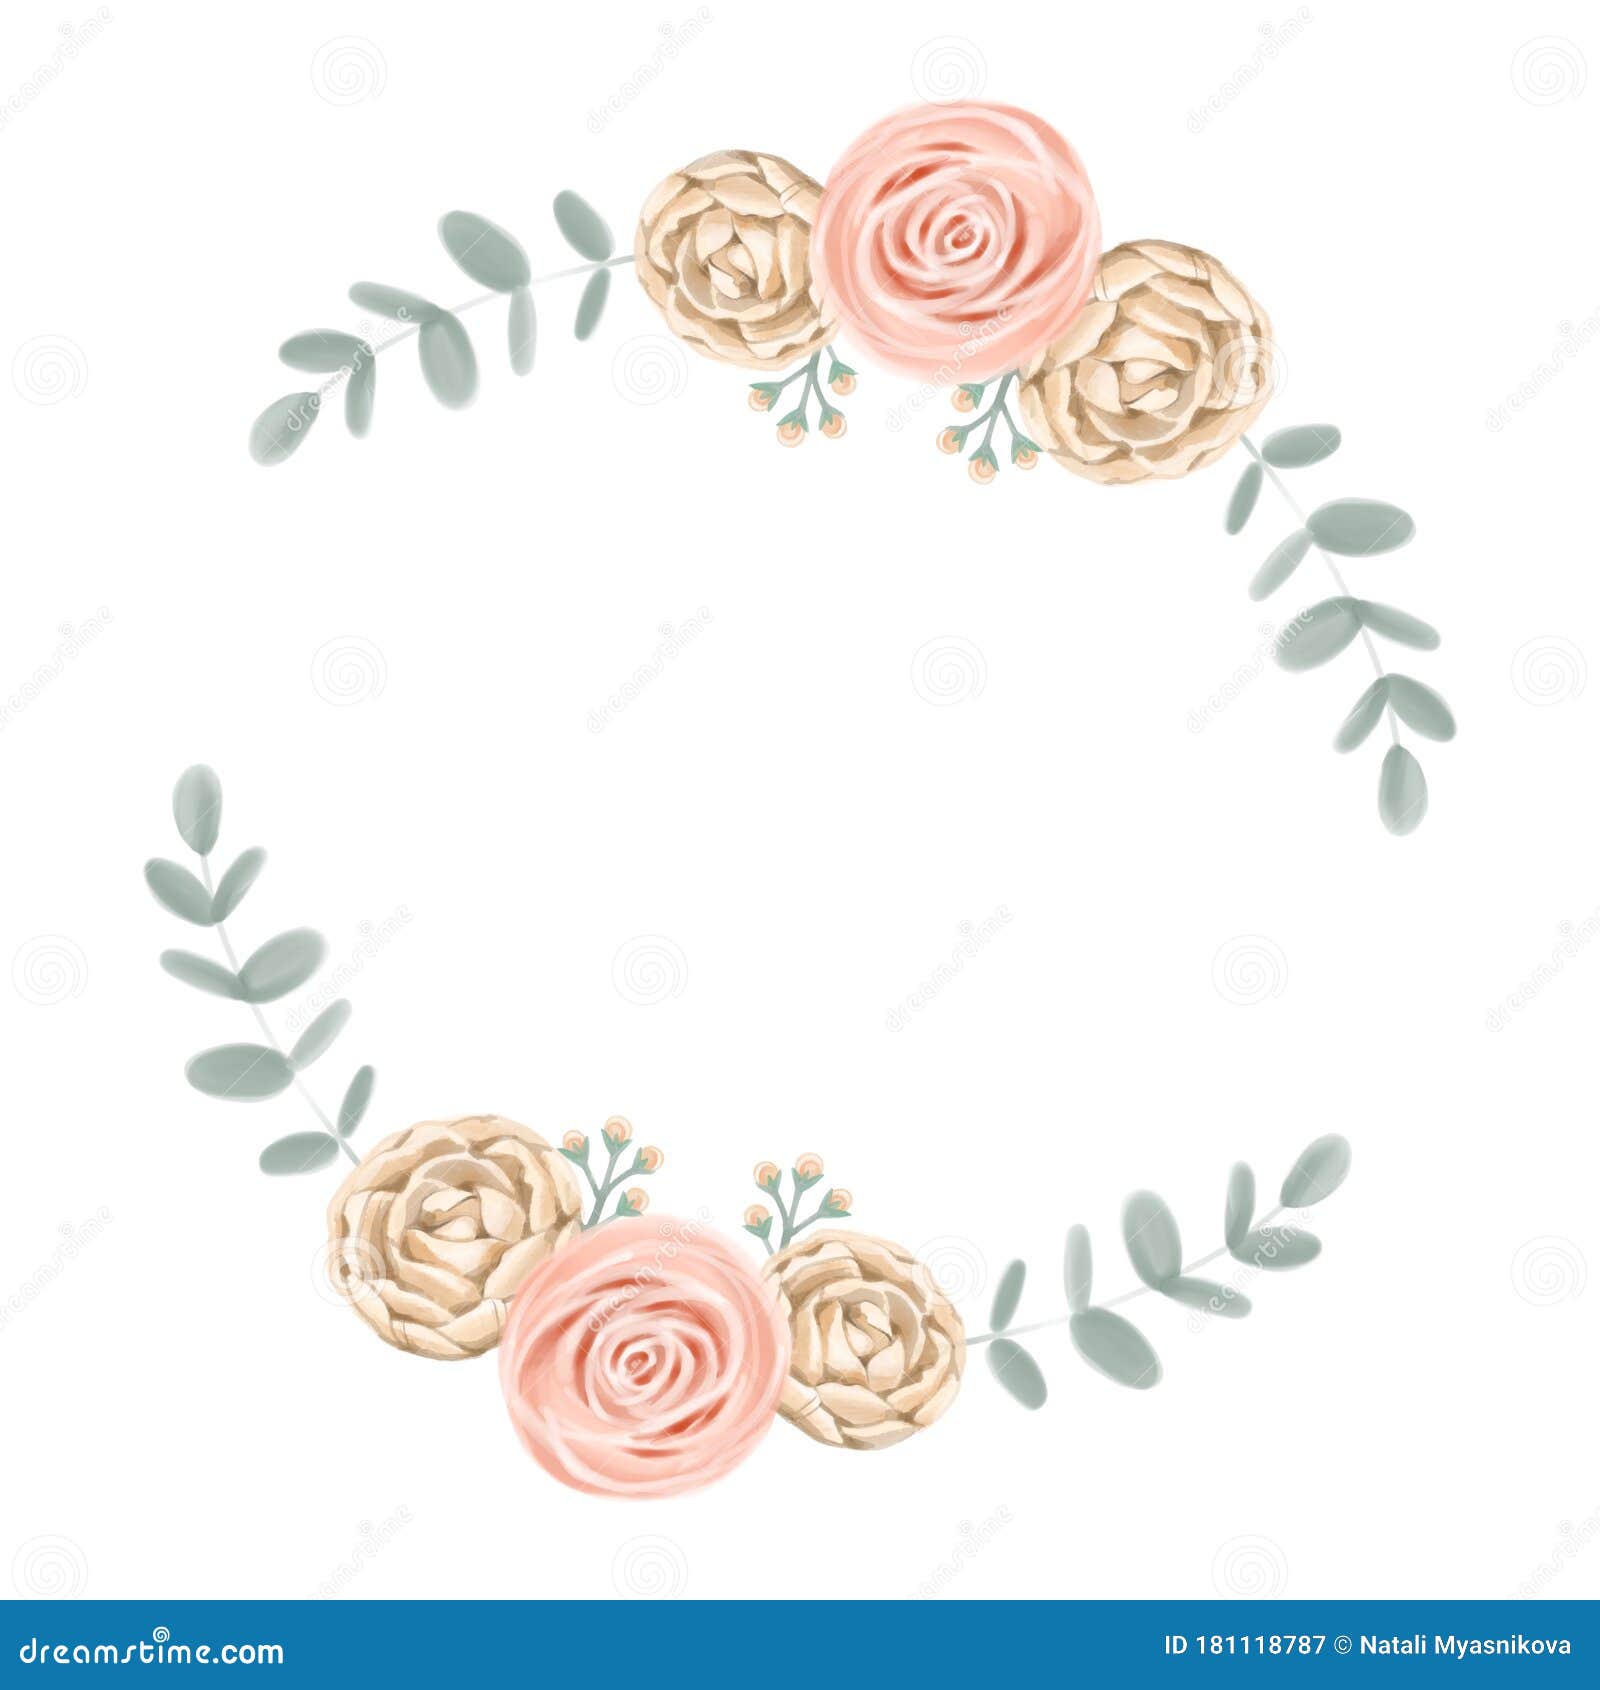 Cute Rose Floral Frame. Watercolor Roses Wedding Background Stock ...